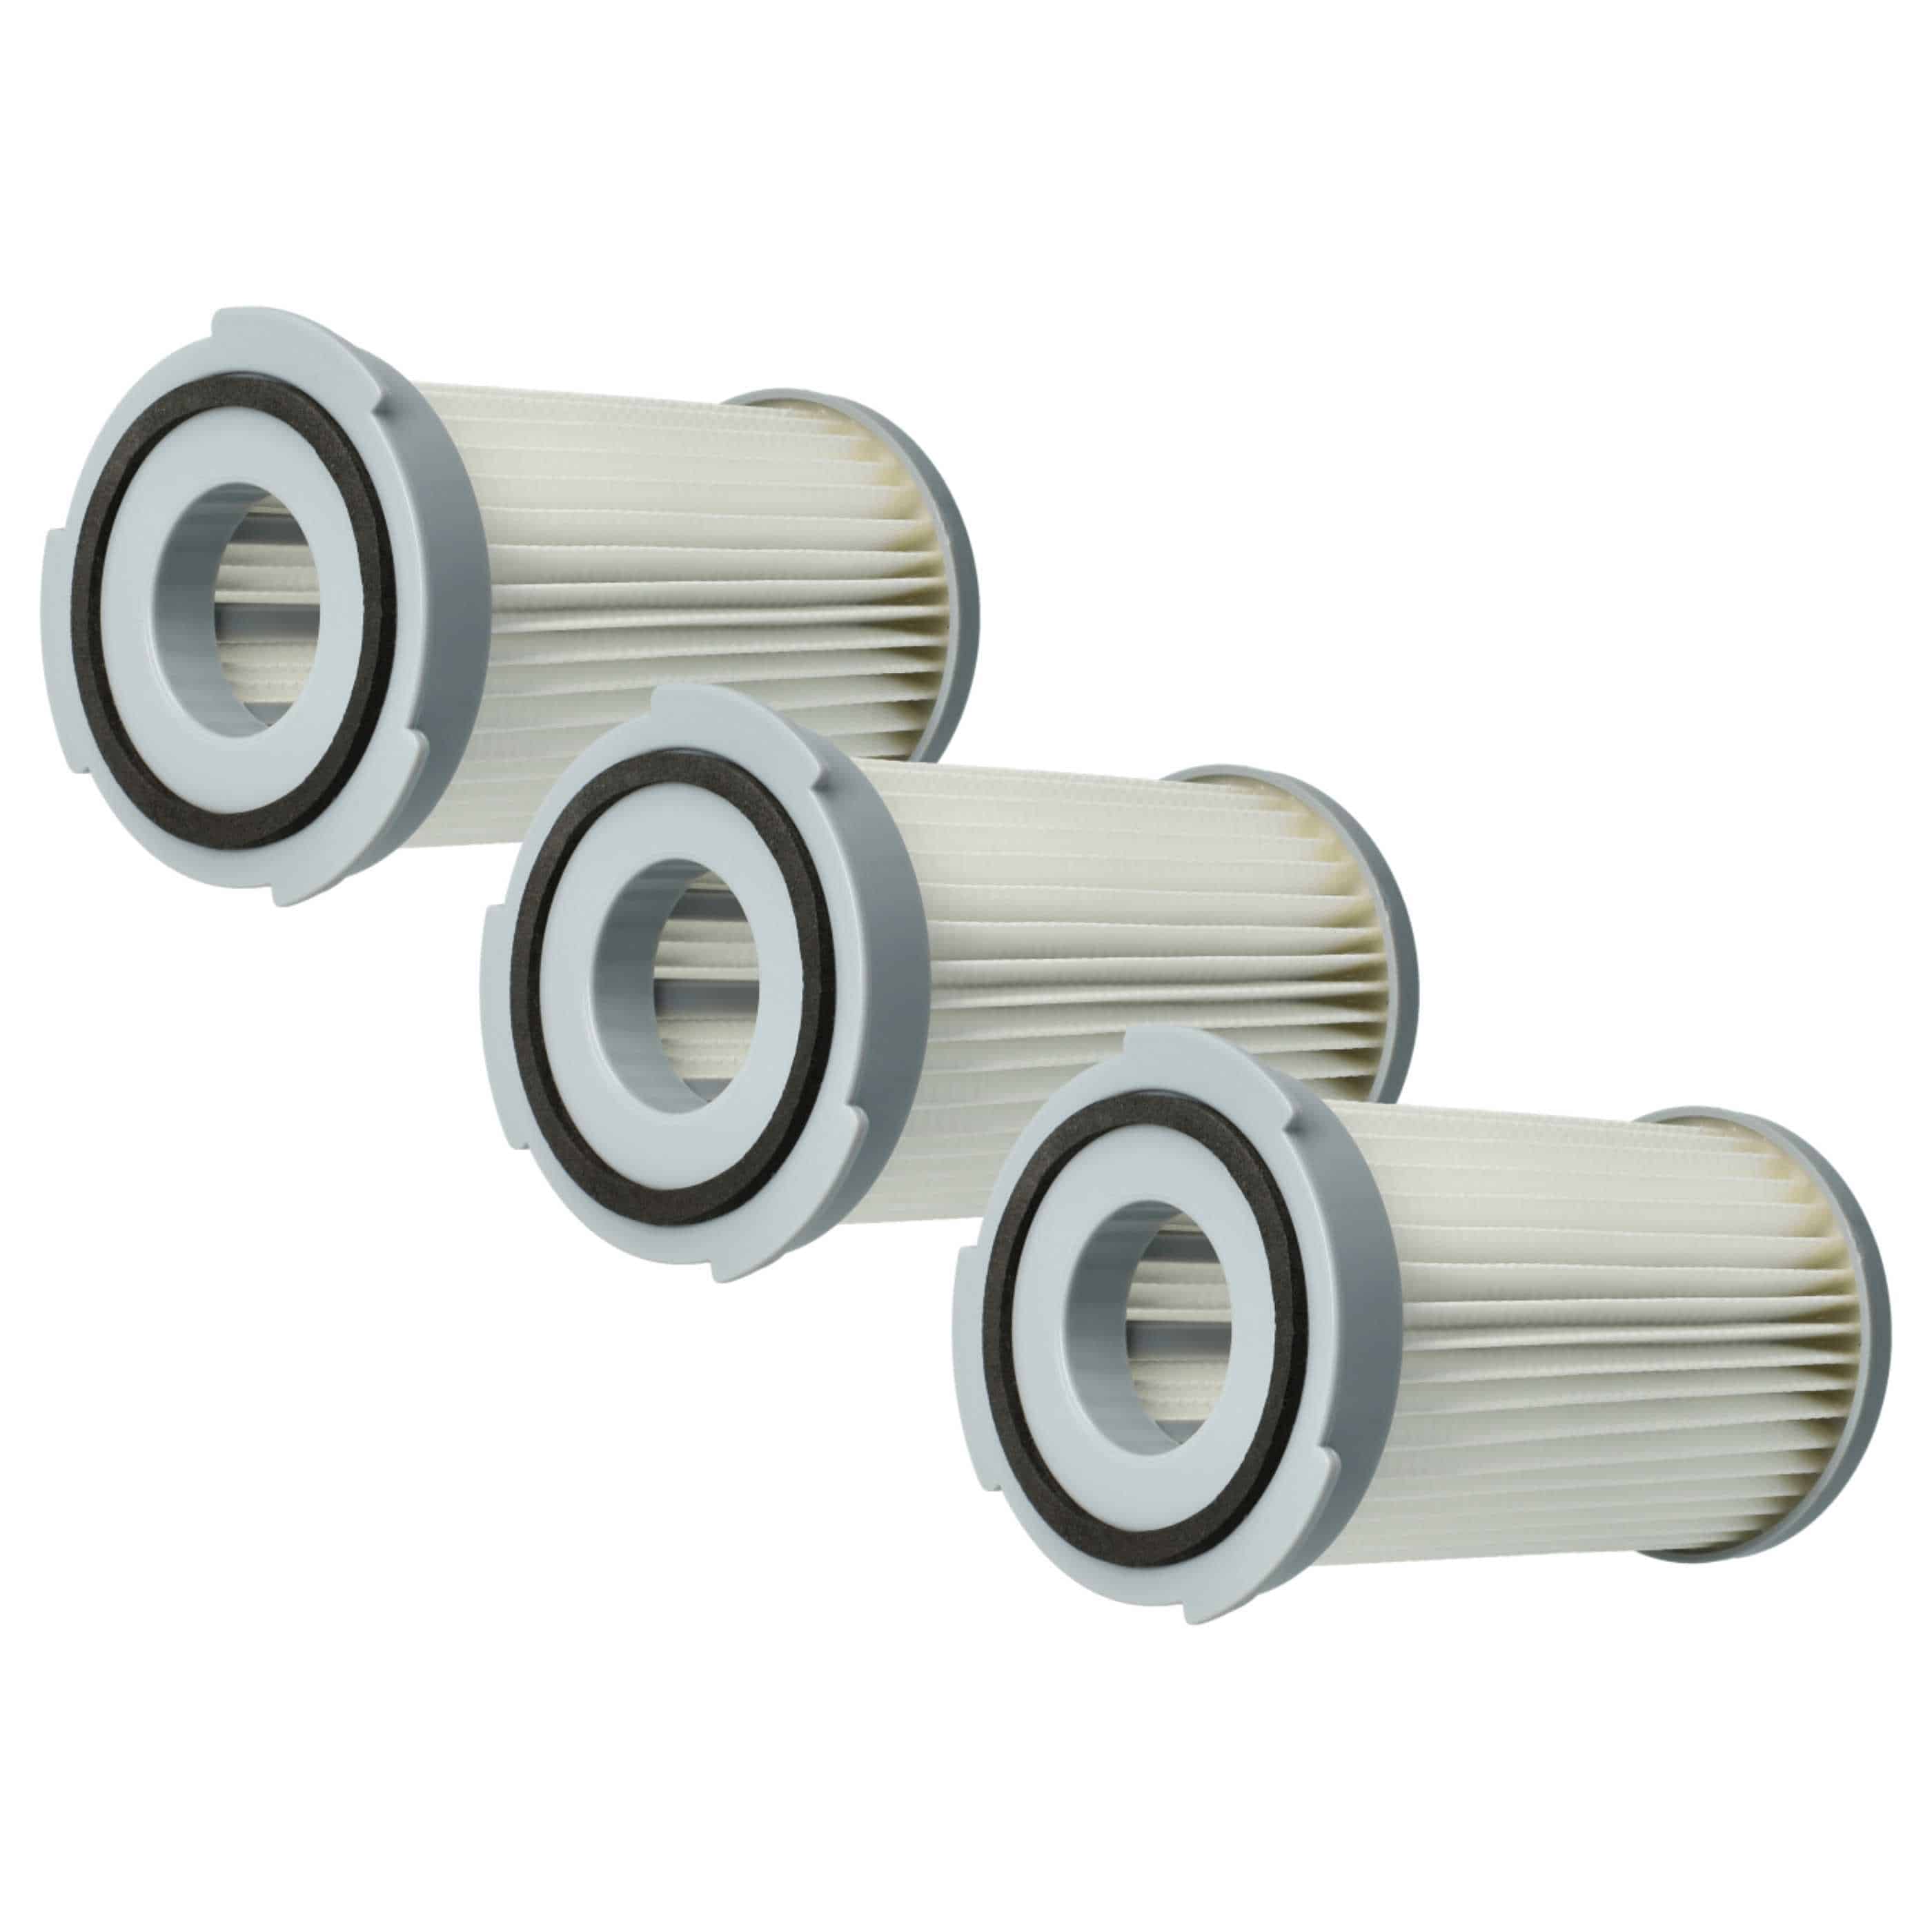 3x exhaust filter replaces Electrolux EF75B for AEG/Electrolux Vacuum Cleaner